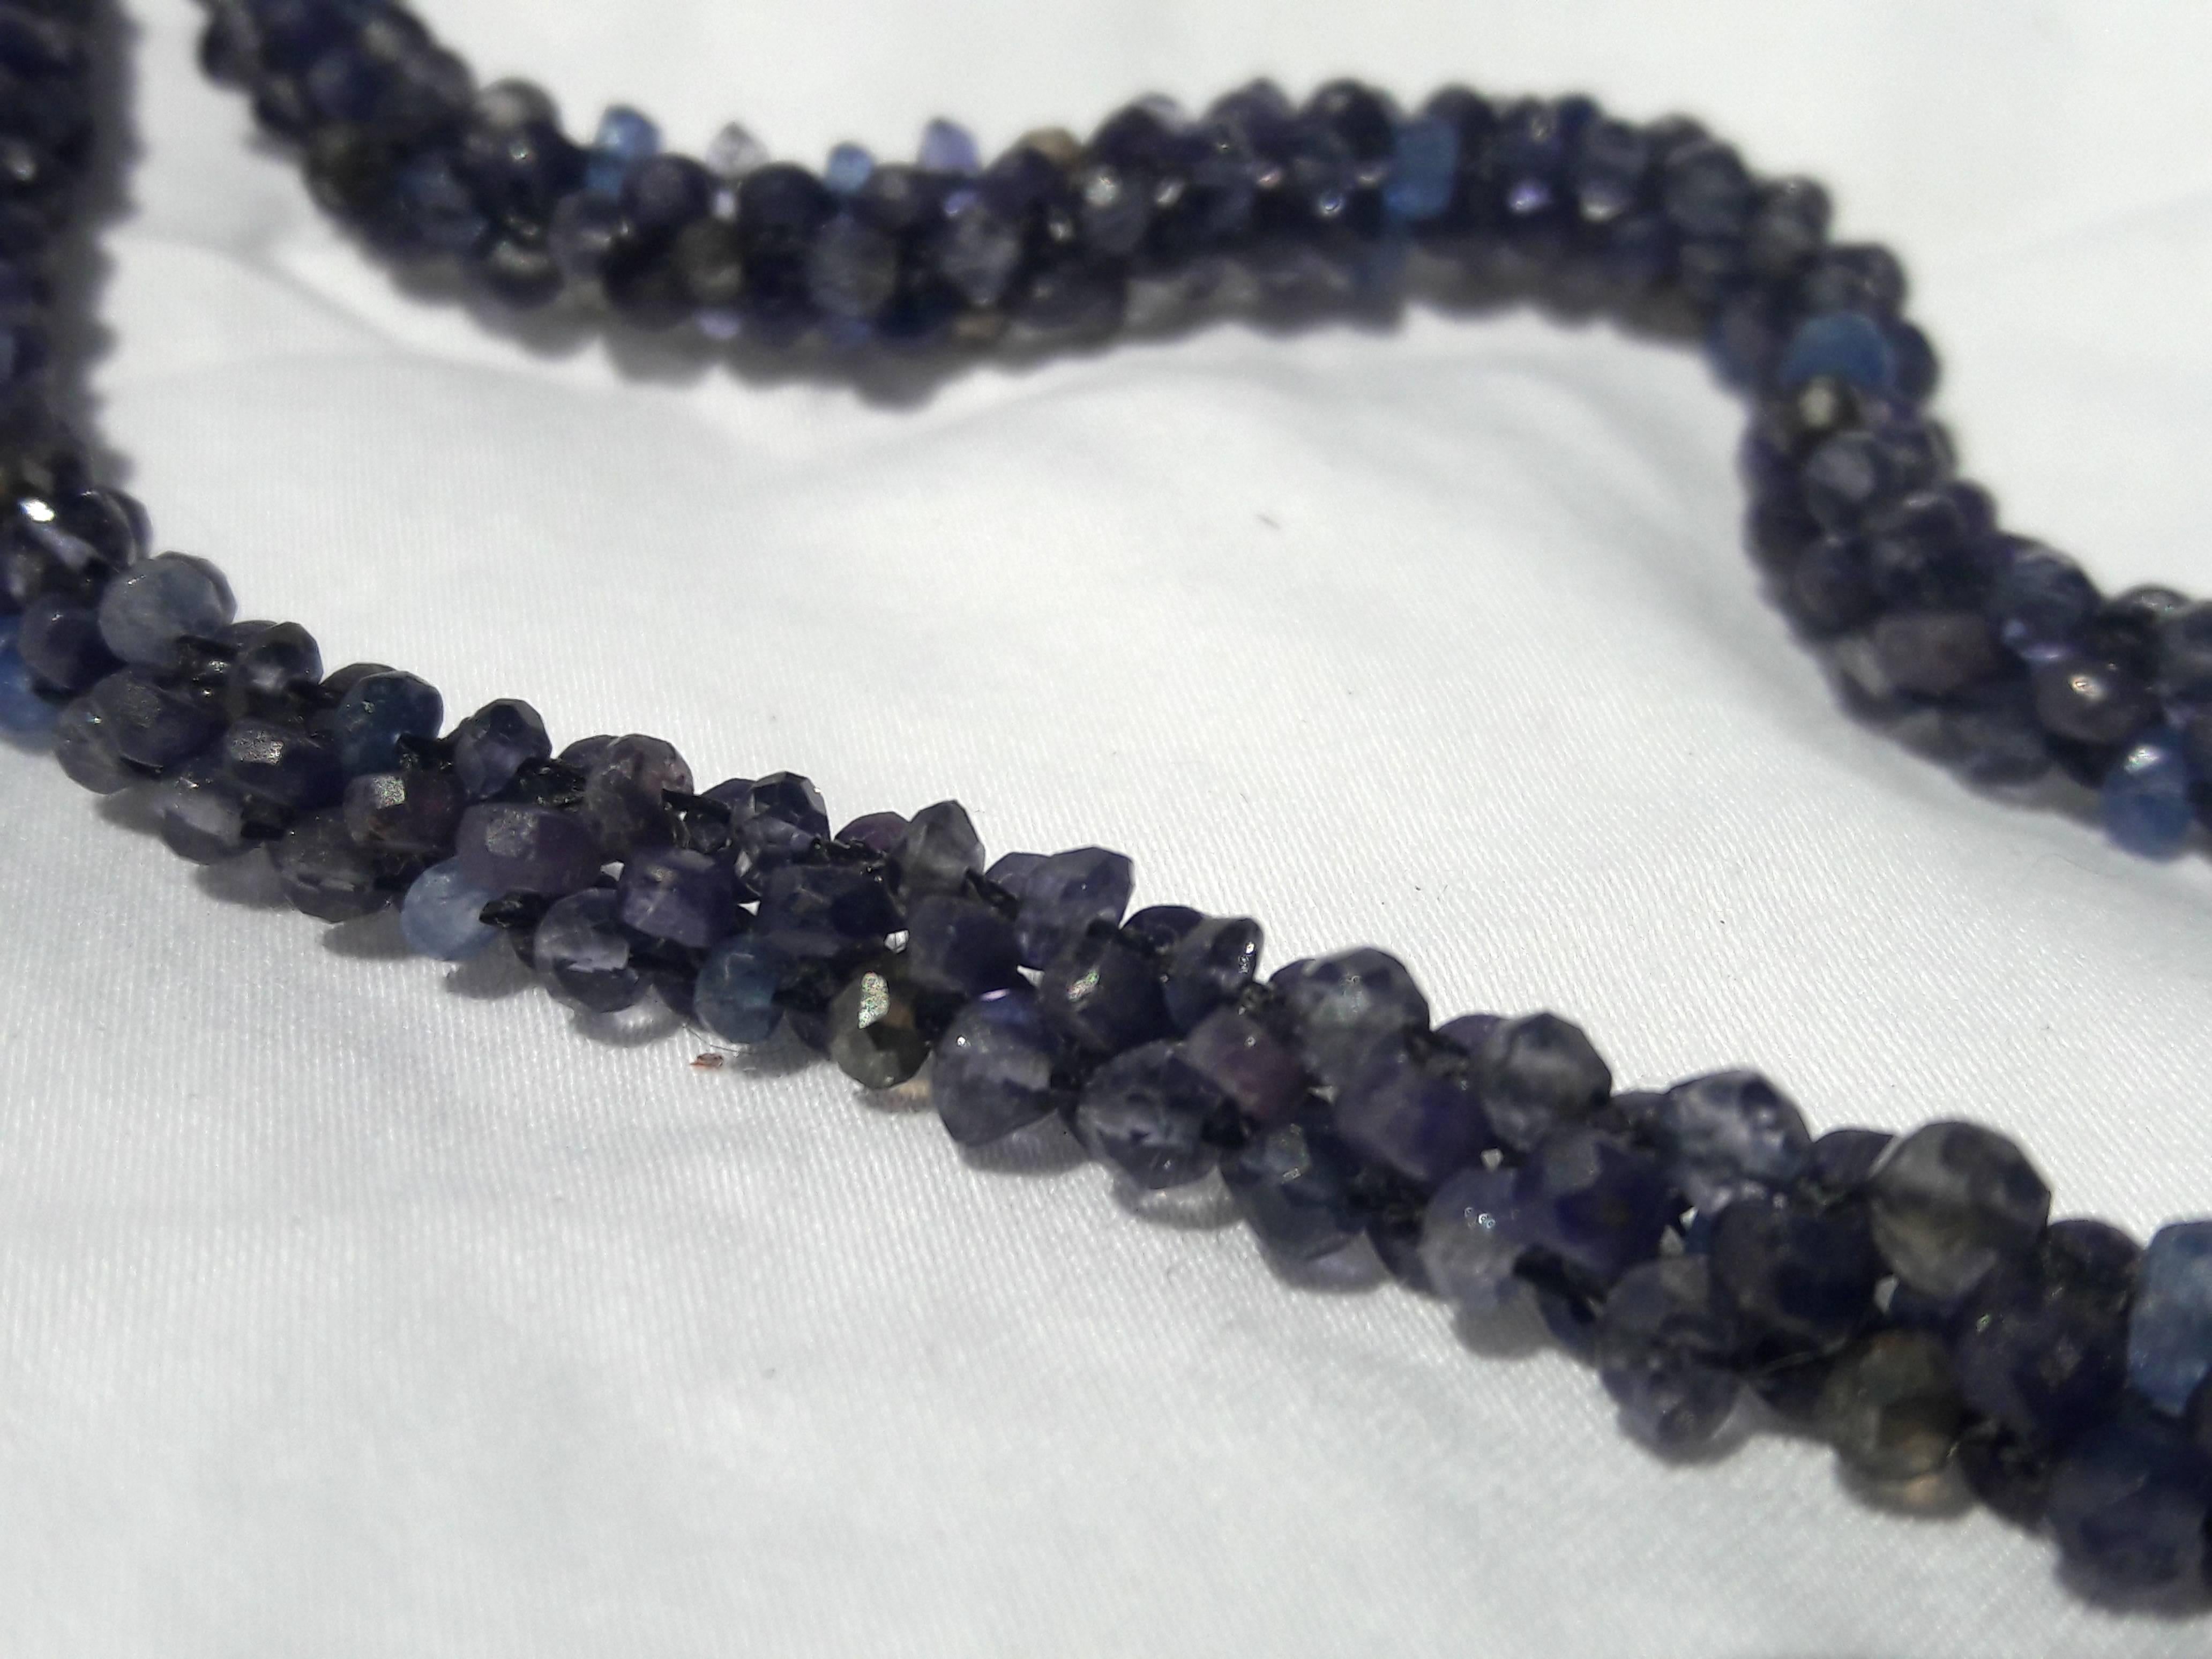 Woven into a tight rope-like strand, faceted Iolite and rough-cut Sapphire beads meet in a contrasting pattern of jagged textures. Secured with two 14 k White Gold clasps that open and connect to a Rhodium-plated silver cross pendant. The Cross